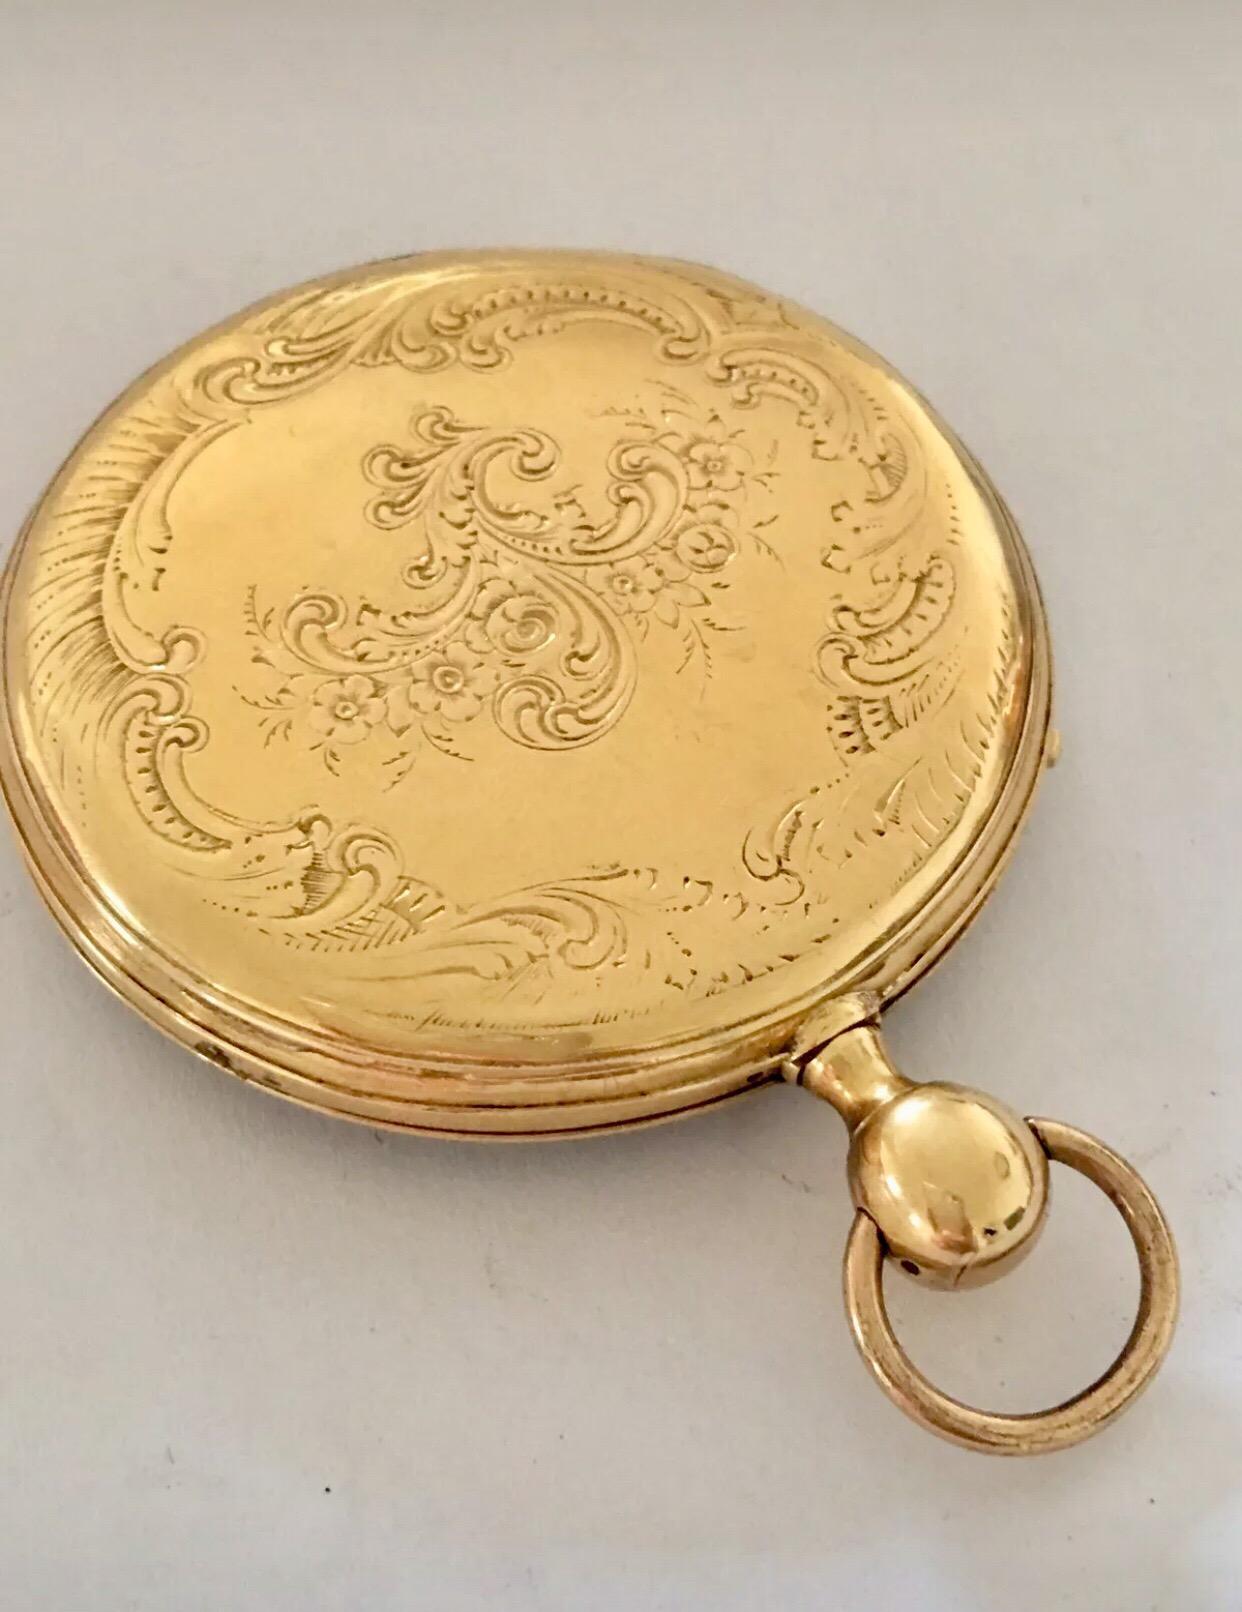 18K Gold Antique Pump up Quarter Repeater Pocket Watch.


This beautiful pump up quarter repeater pocket watch is in good working condition and it is running well. Visible signs of ageing and wear with light marks and tiny dents on the watch case.